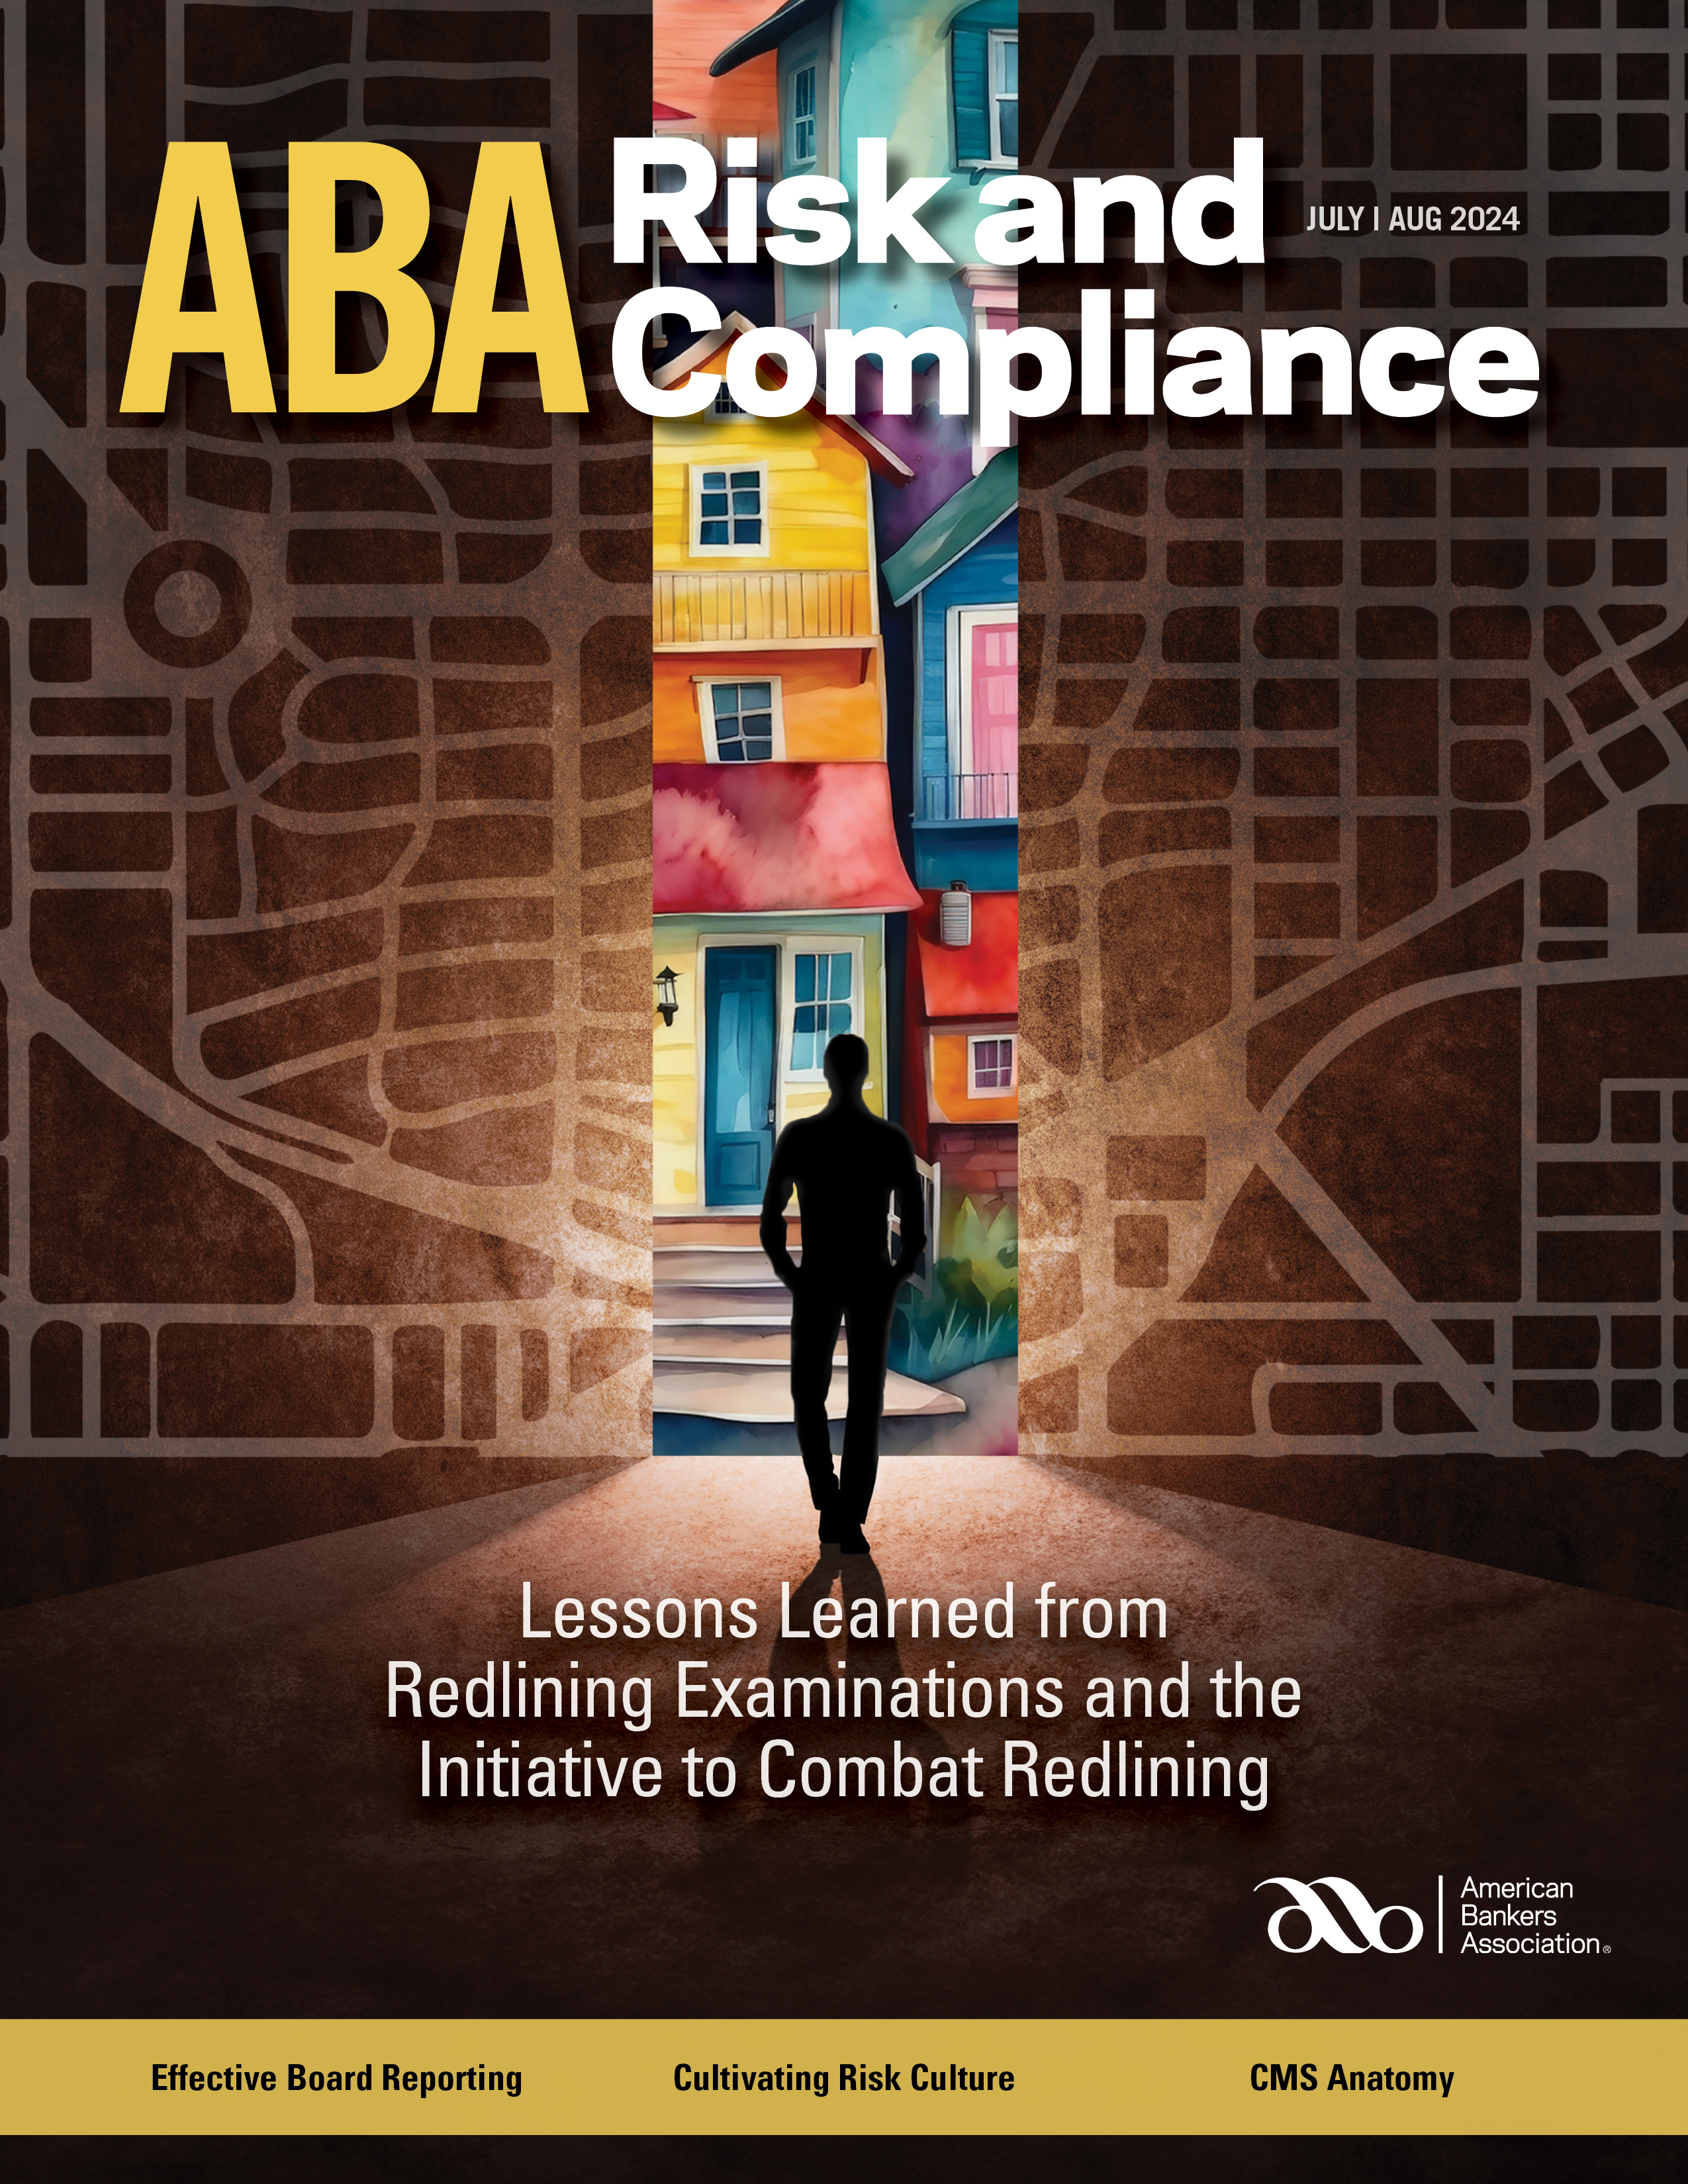 ABA Risk and Compliance Magazine Cover, July/August 2024